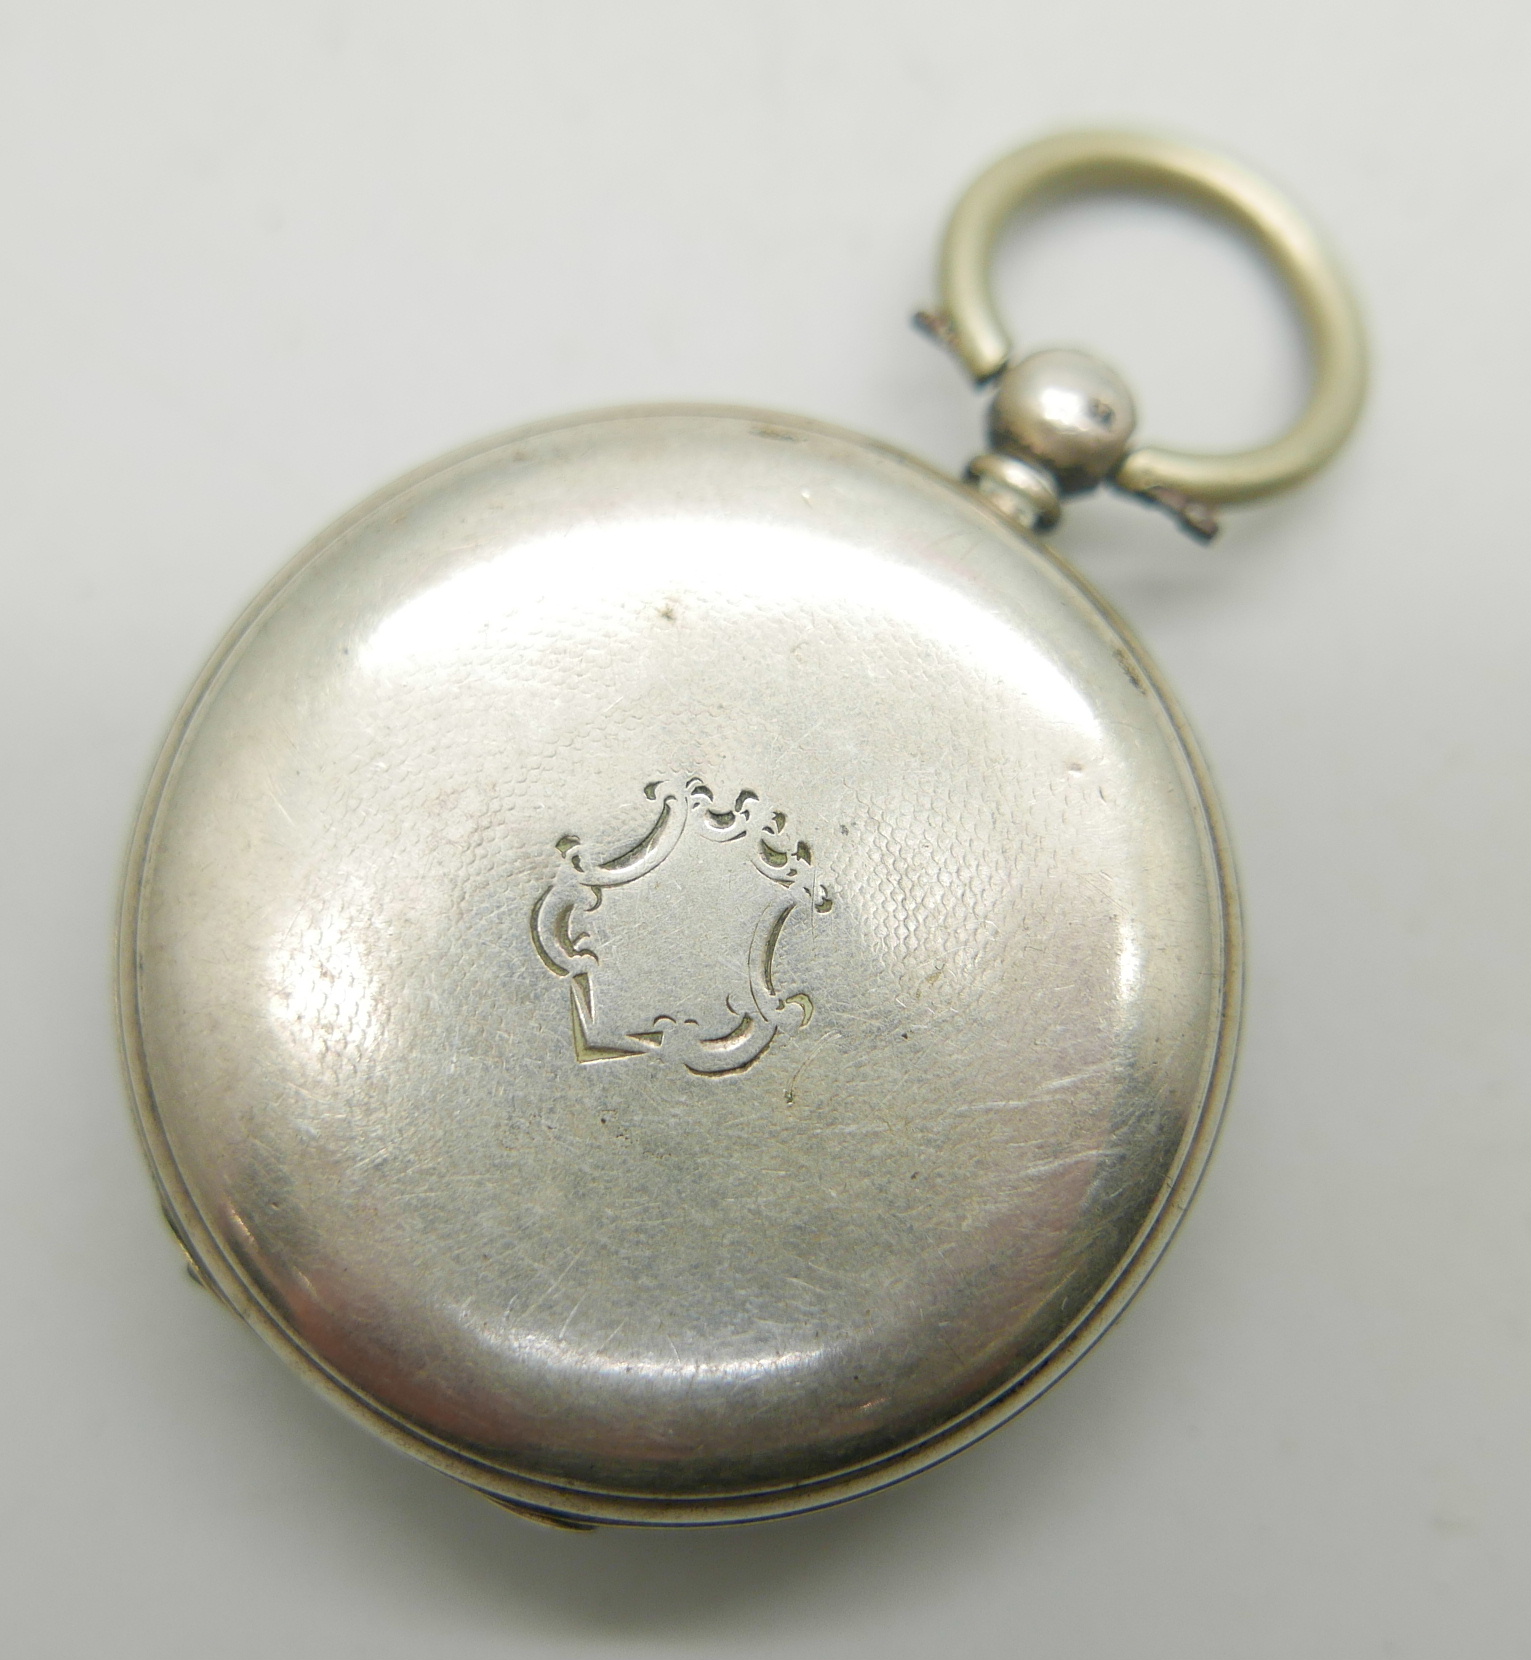 A silver pocket watch, London 1874 - Image 2 of 3